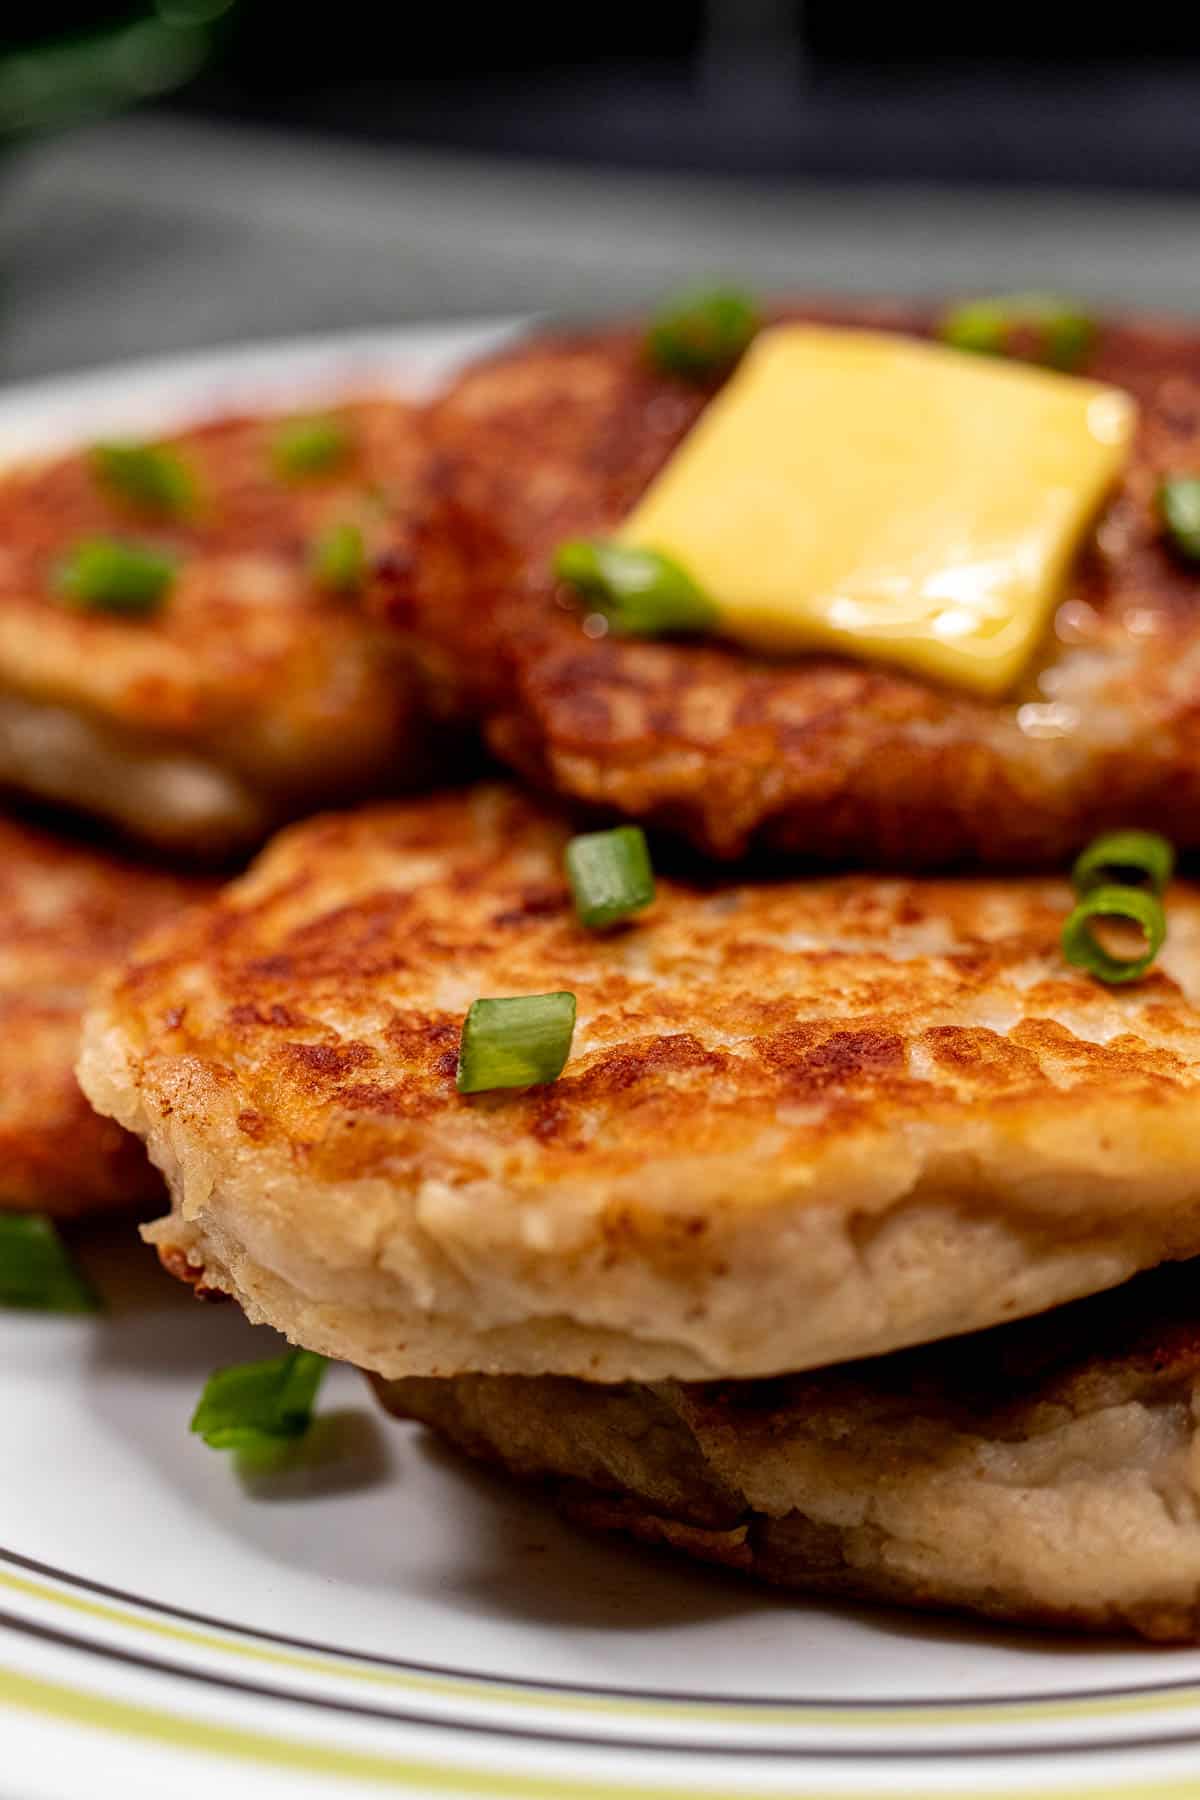 Close view of Irish boxty on a plate. Crispy hashbrown exterior with a soft looking center.